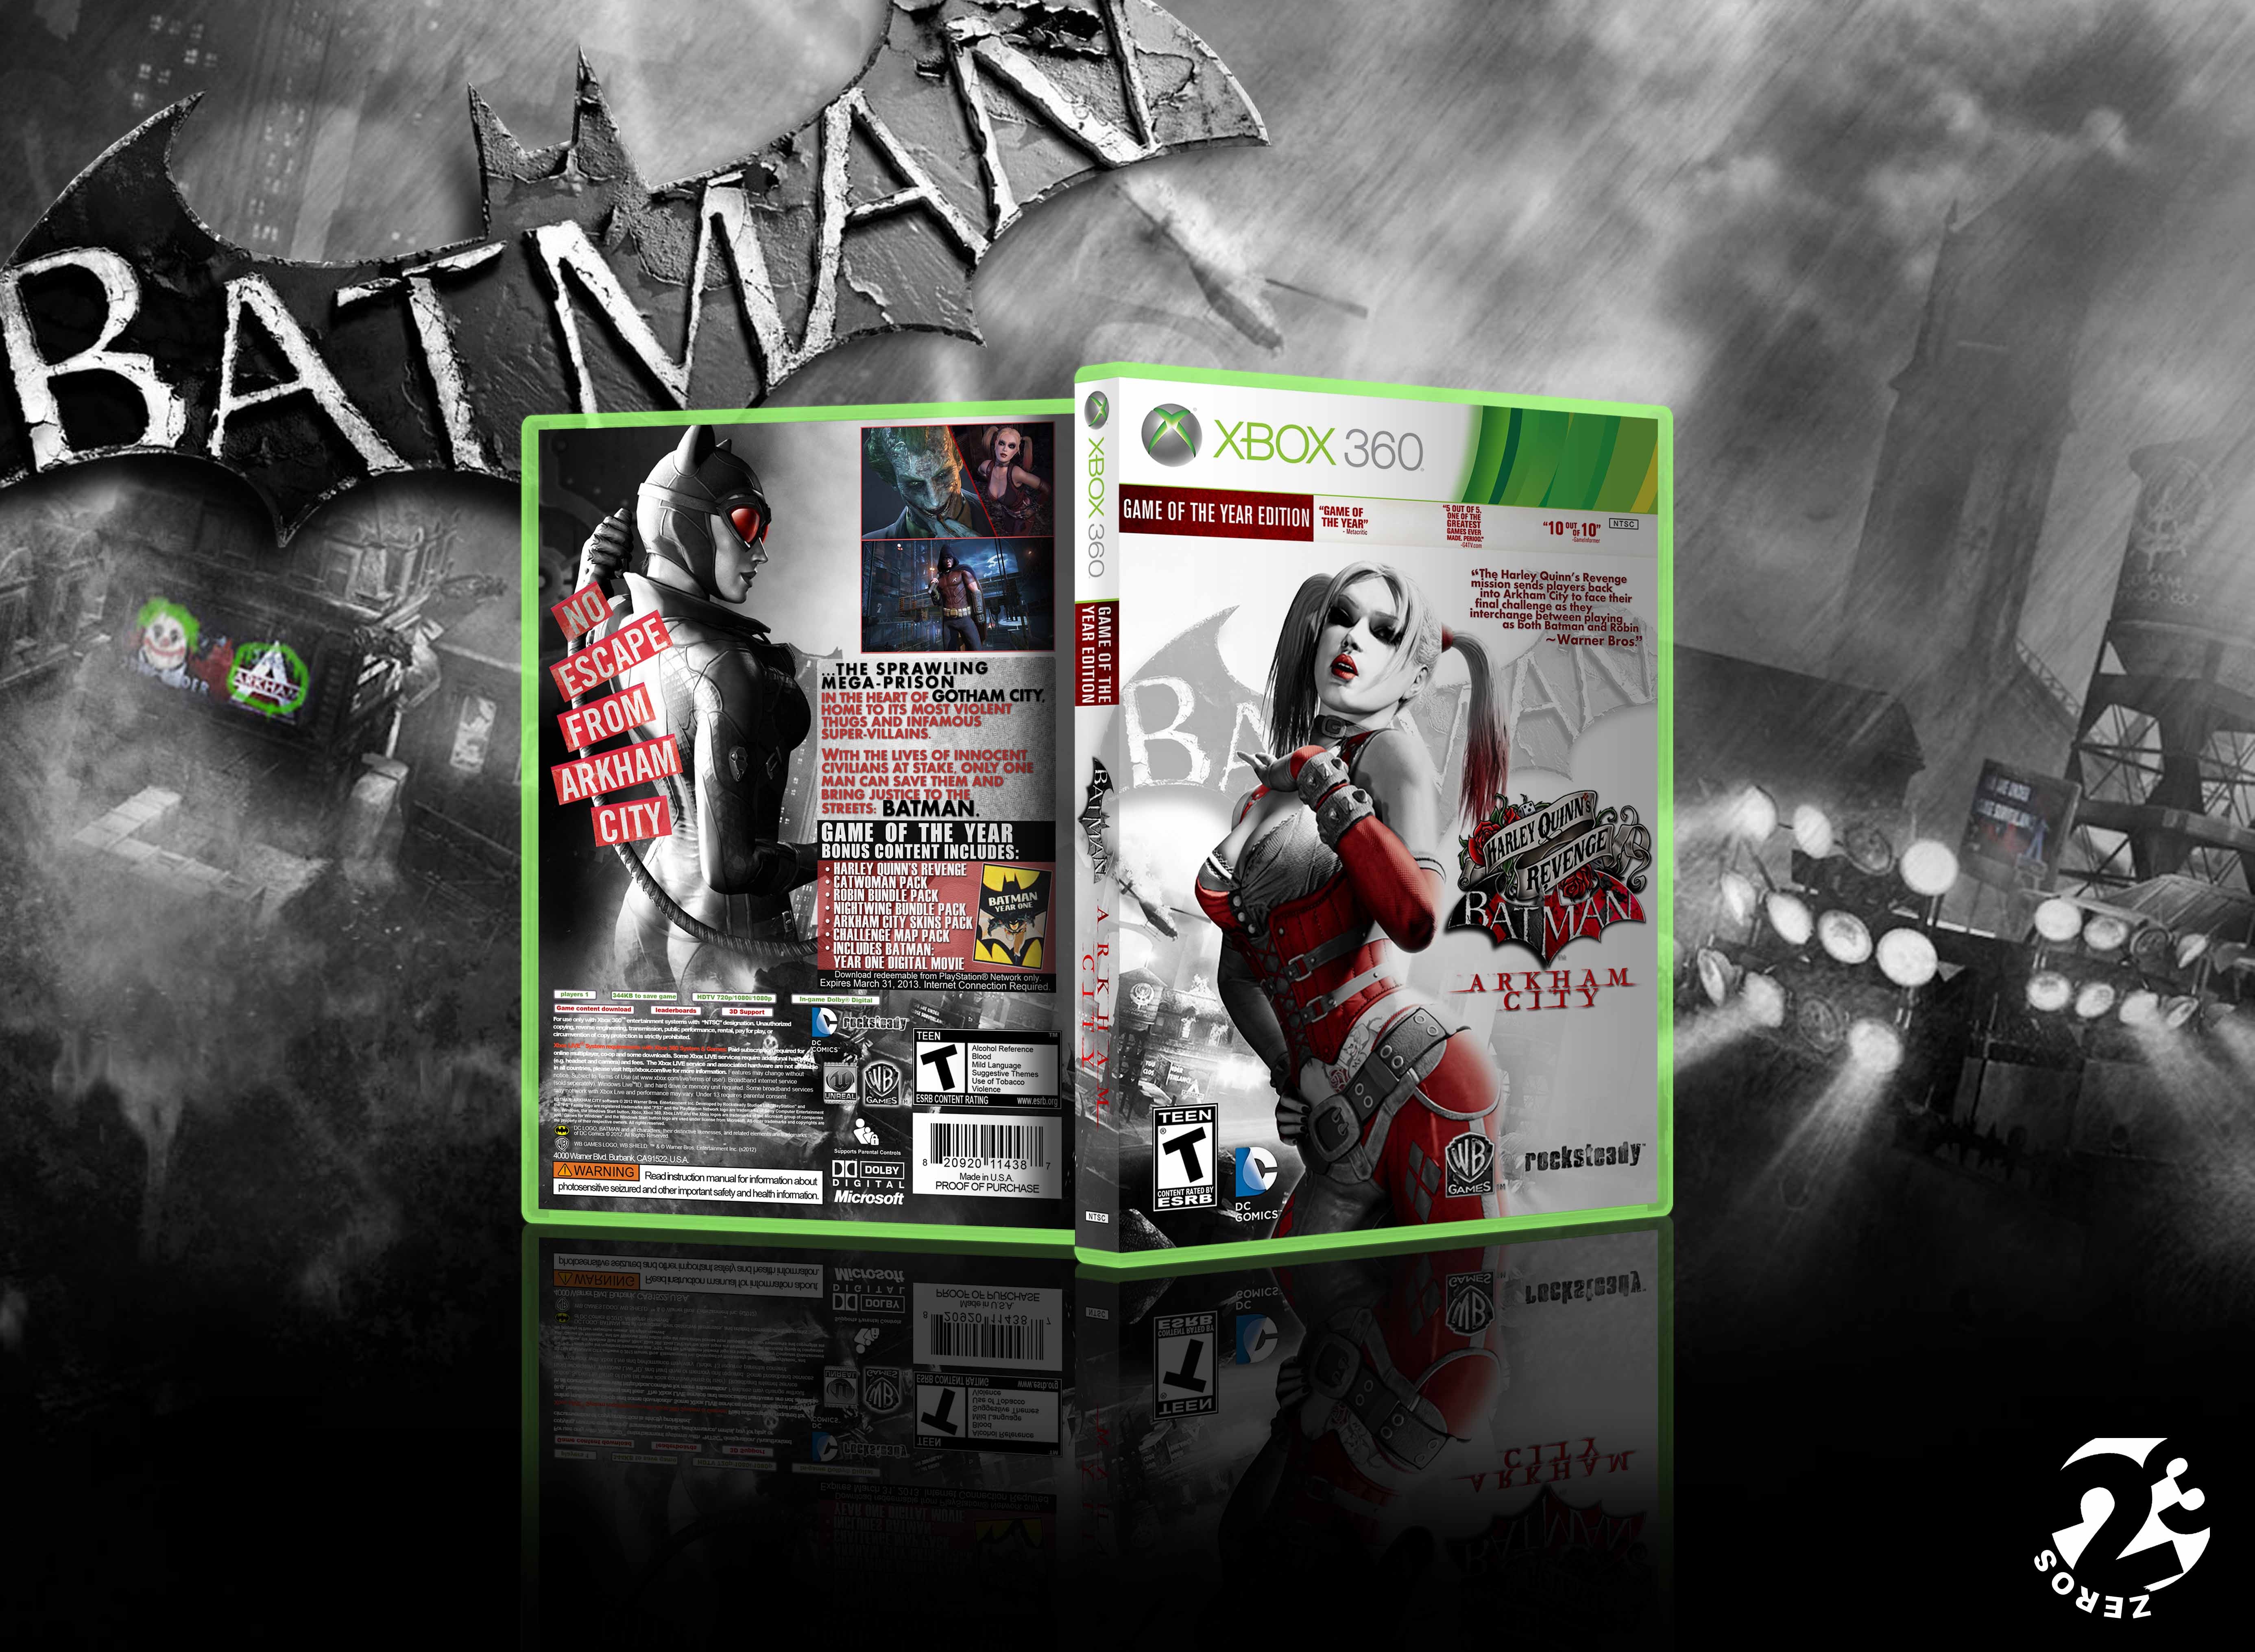 Batman Arkham City Game of the year Edition box cover